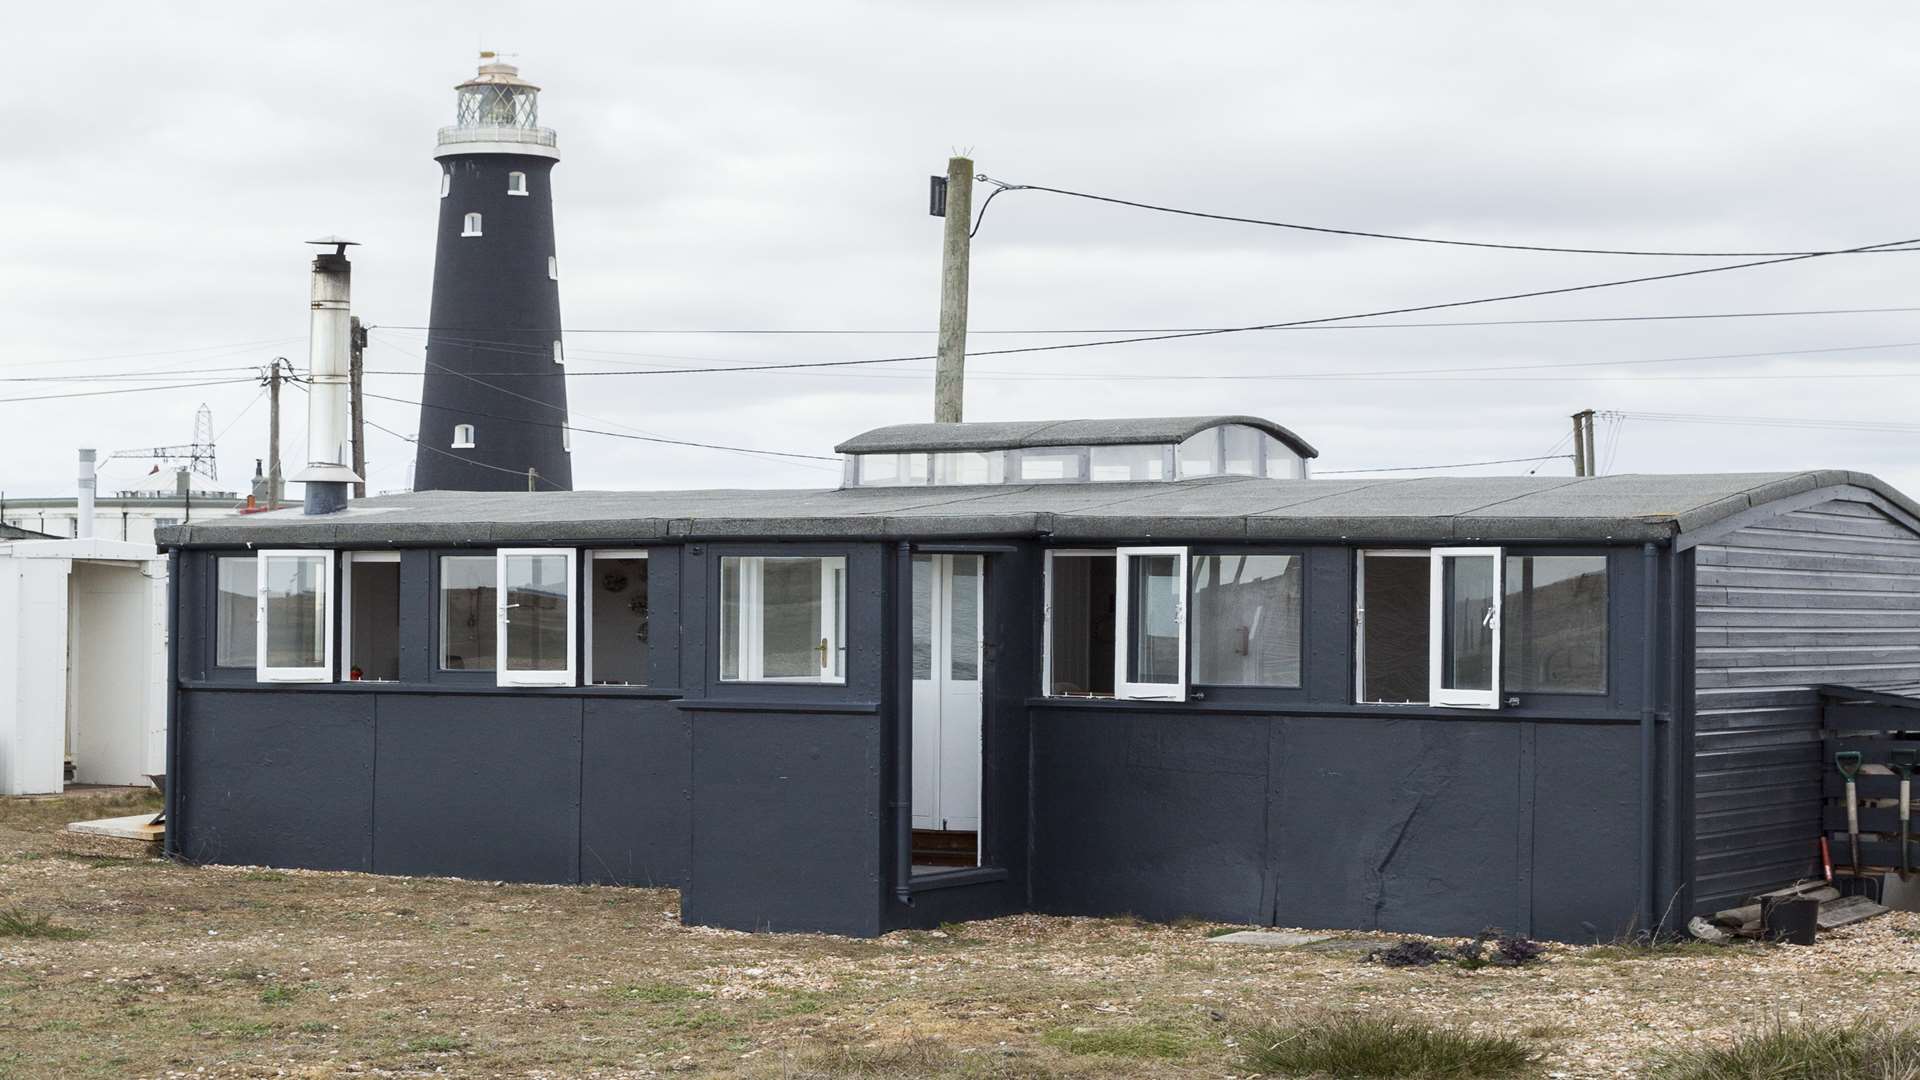 The home sits in the shadow of the famous Old Lighthouse at Dungeness. All photographs by Chris Snook